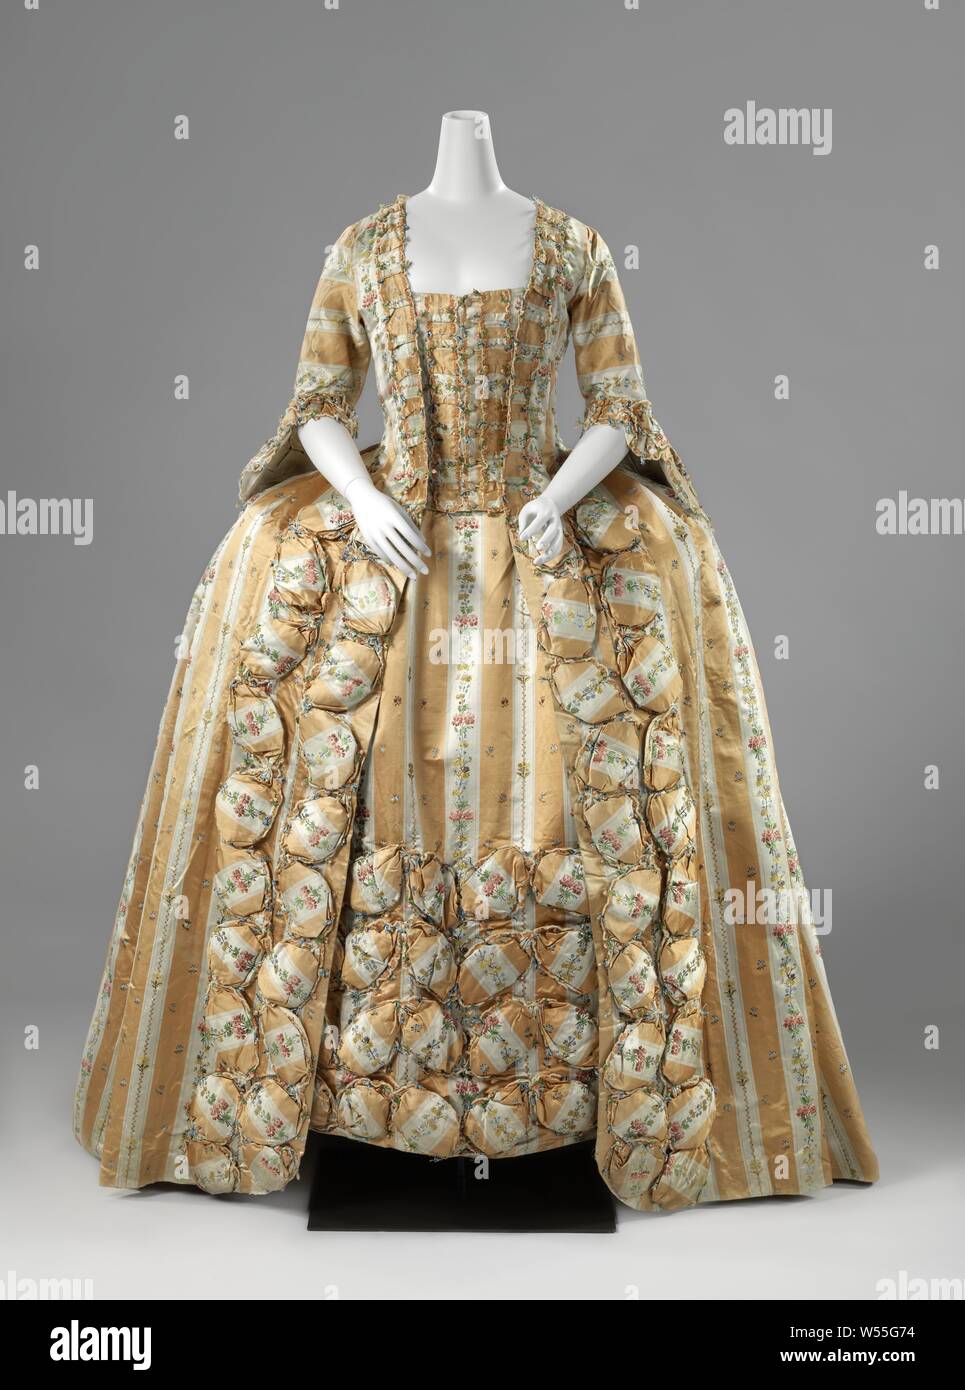 Skirt of a frock or robe à la française made of silk with vertical yellow and white stripes and a multi-colored flower pattern with oval pouffes and lined with a multi-colored chiné, Skirt of a frock or robe à la française made of silk with vertical yellow and white stripes and multi-colored bouquets, decorated with oval pouffes and lined with a multi-colored chiné. Model: The skirt consists of full bands on the front, while the invisible parts of the skirt consist only half of the floral side and half of a plain white taffeta side. Decoration: the skirt has four horizontal edges of oval Stock Photo